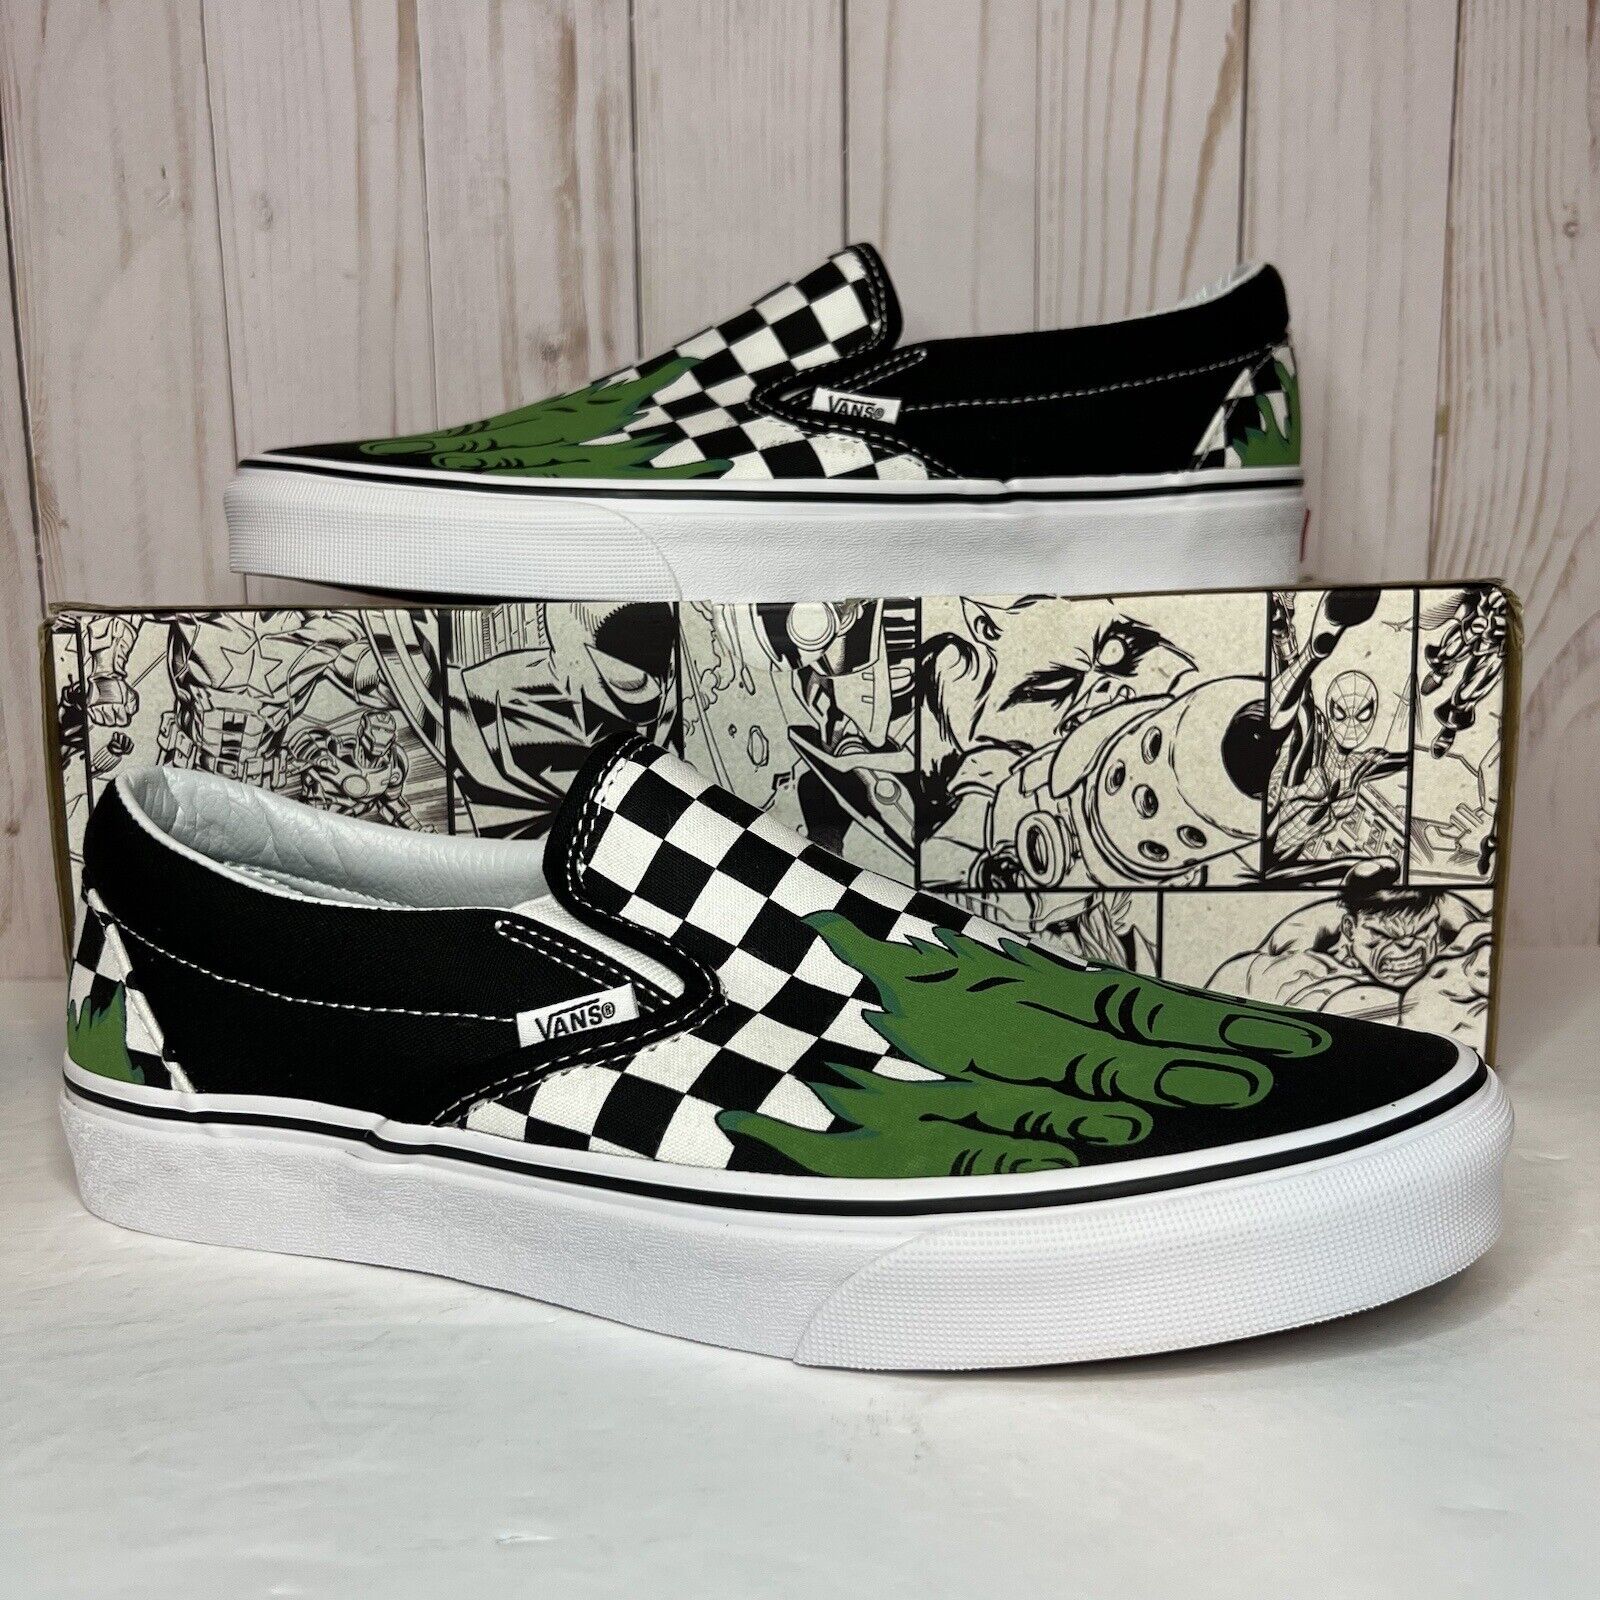 Vans x Marvel Incredible Hulk Checkerboard Slip On Shoes Mens Size 9.5 Worn Once